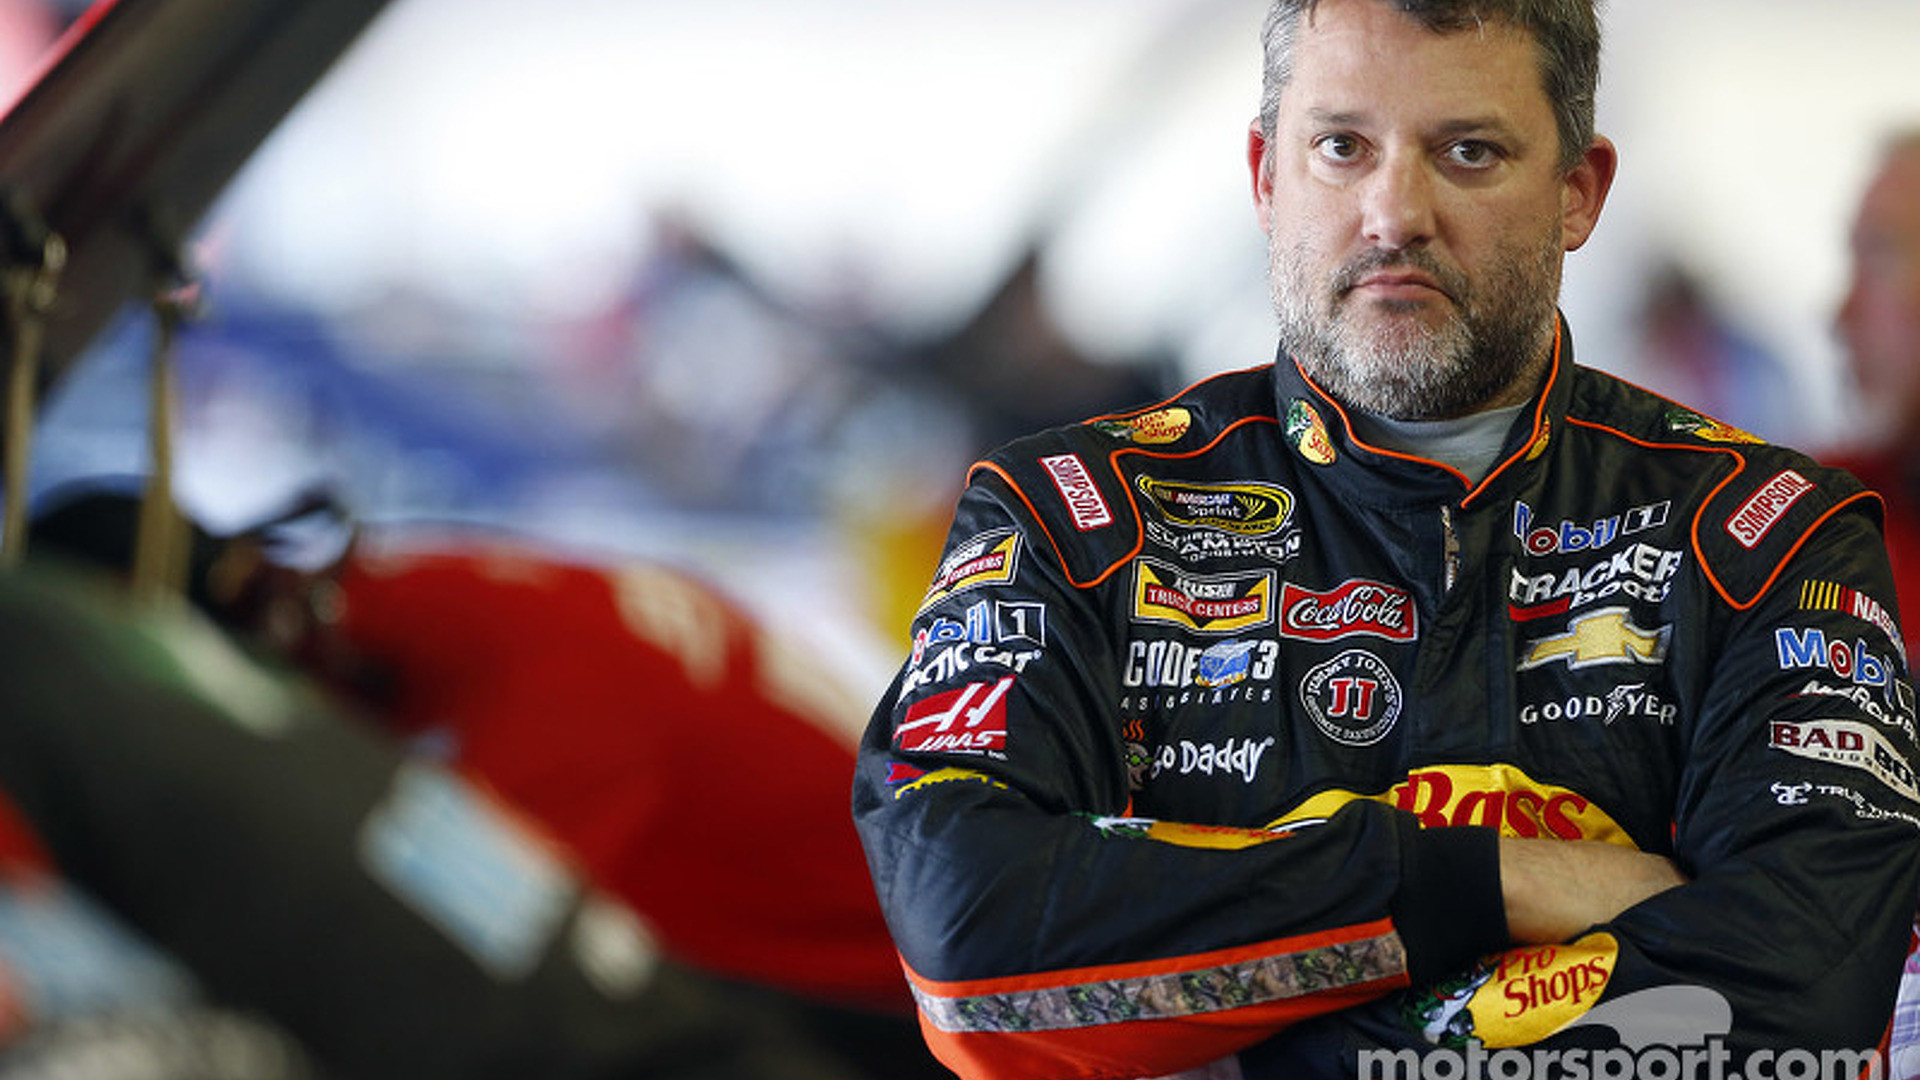 1920x1080 NASCAR fines Tony Stewart $35,000 for violating member conduct guidelines